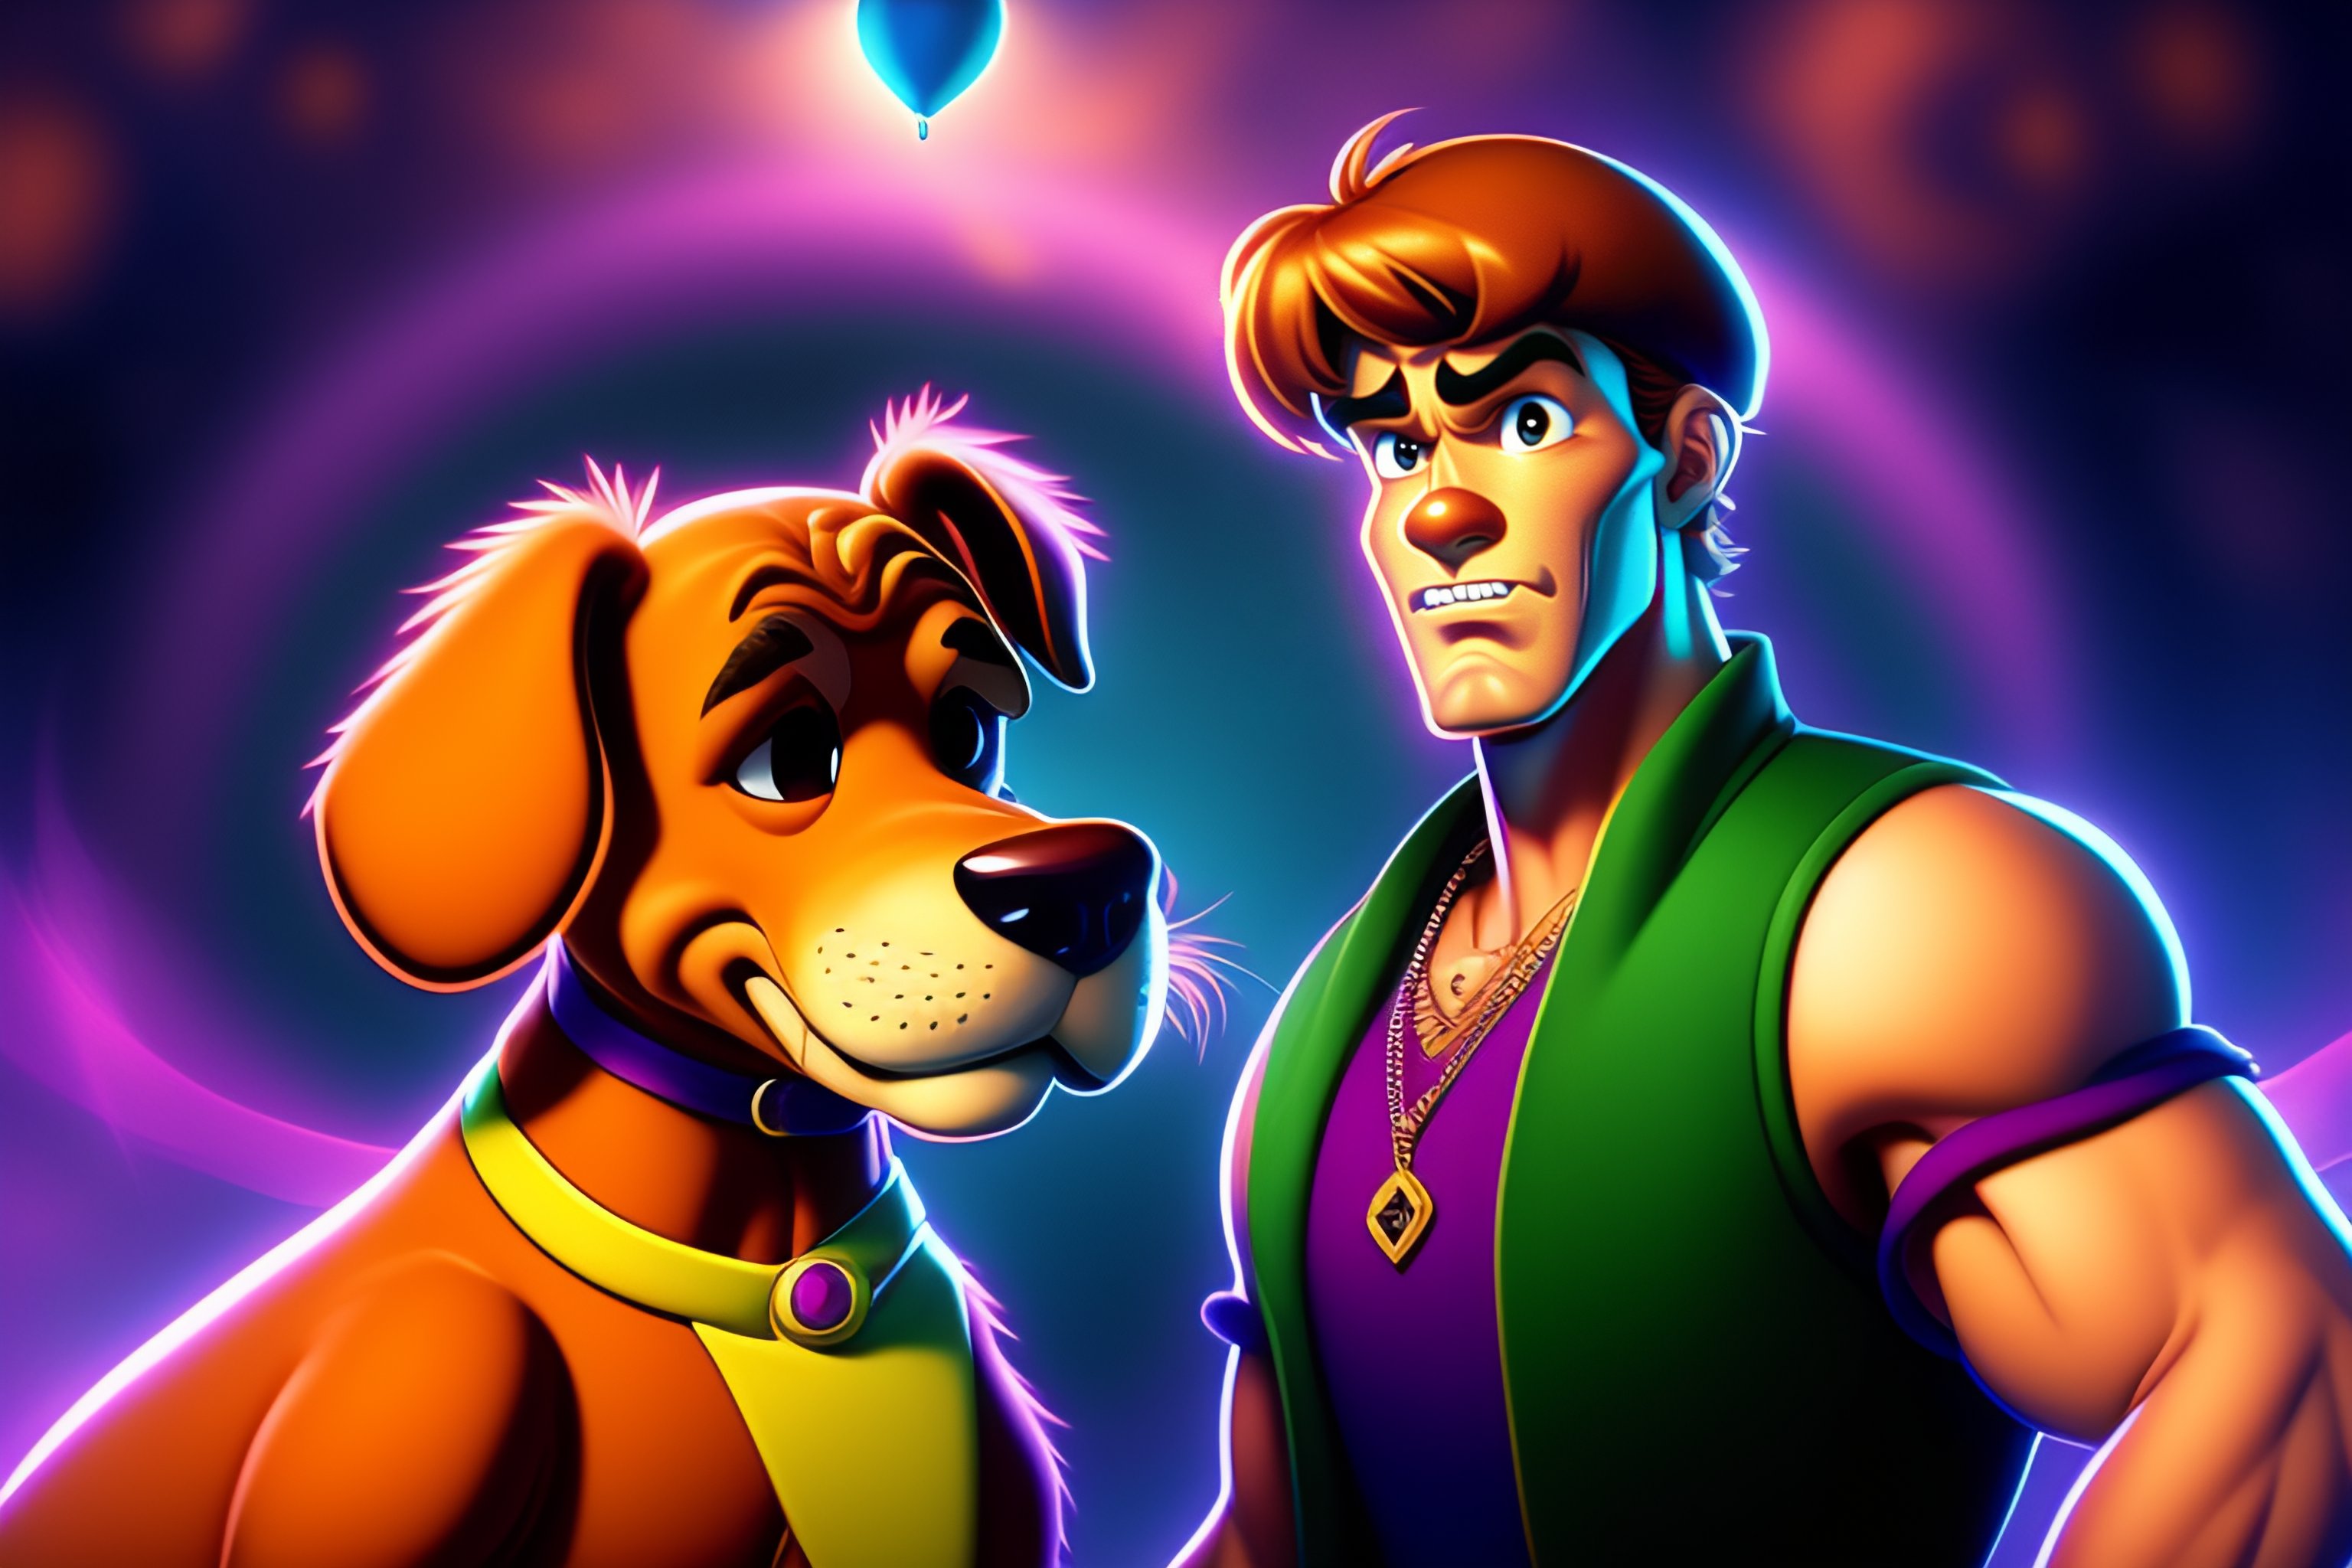 shaggy and scooby scared